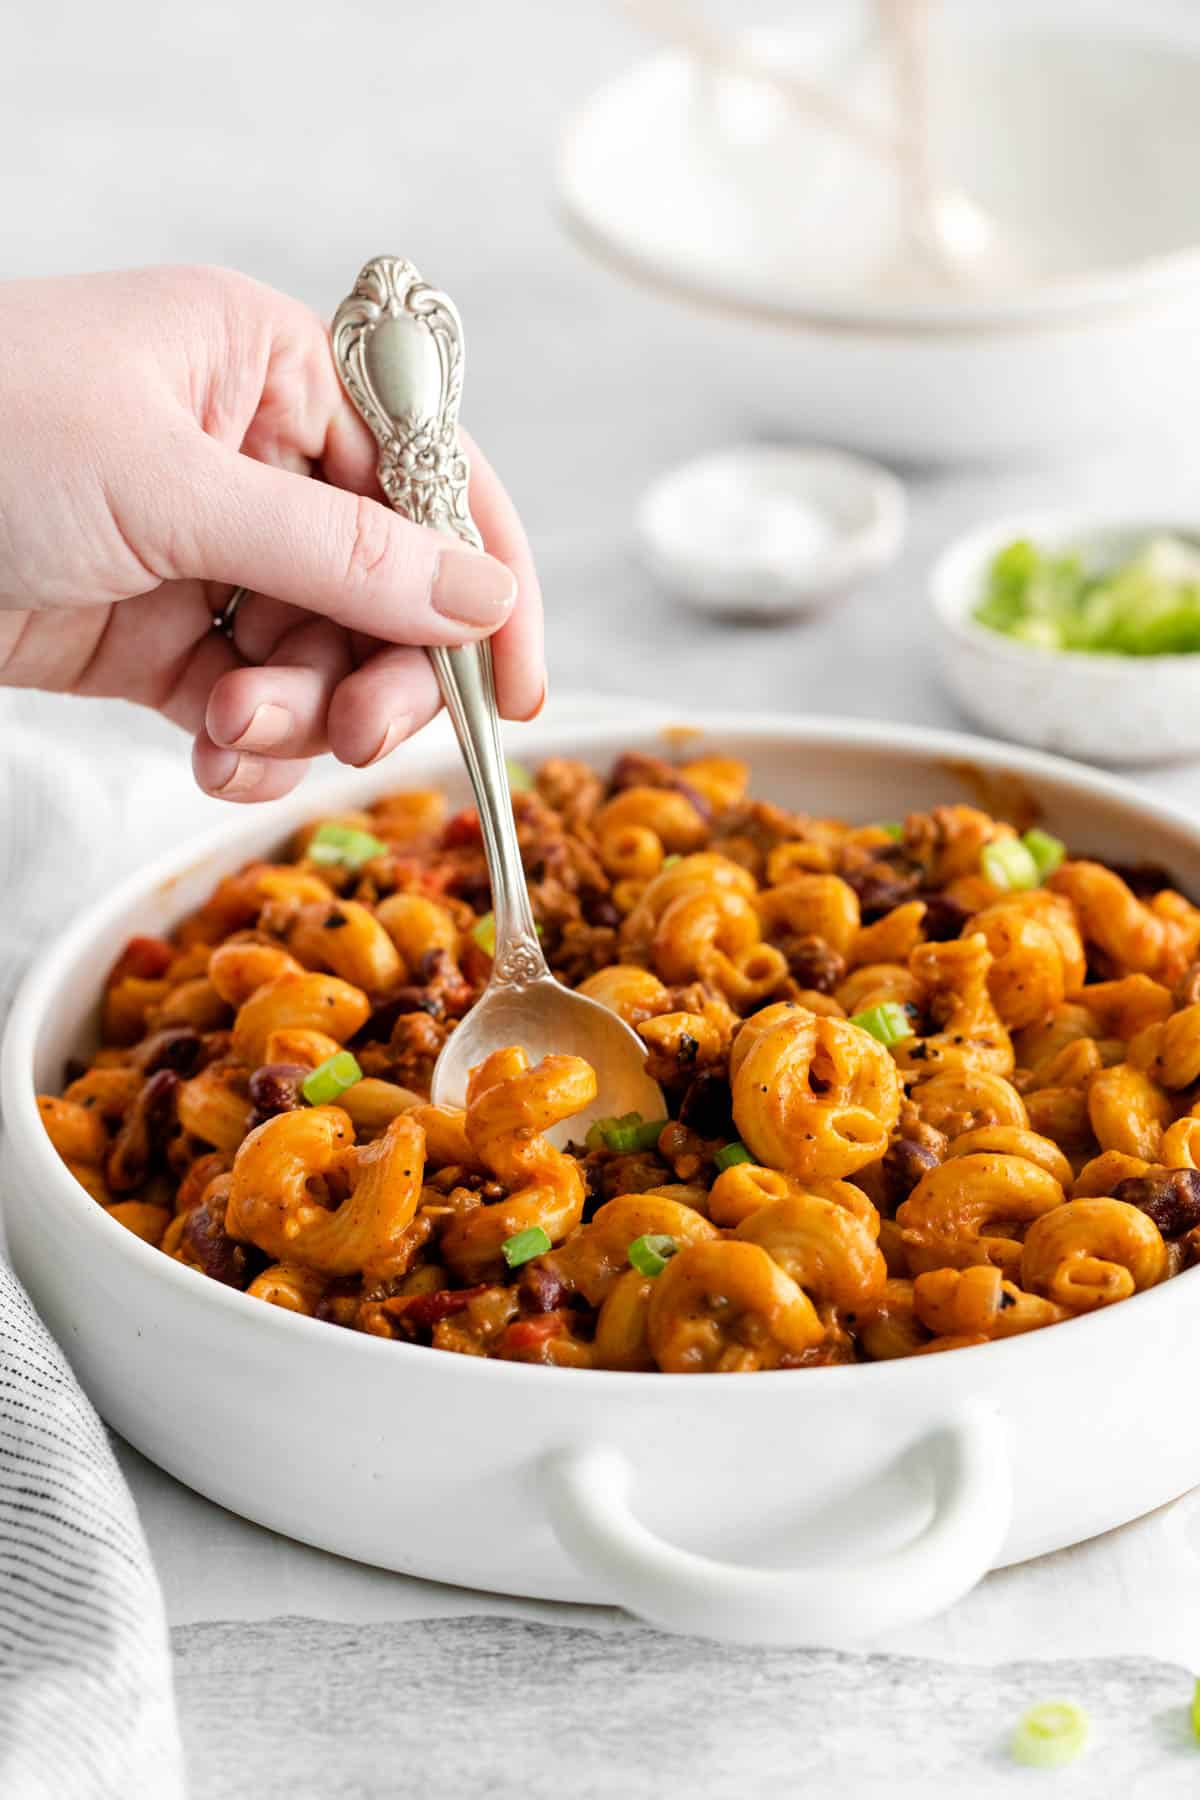 A large white serving dish with chili mac and a hand holding a spoon.